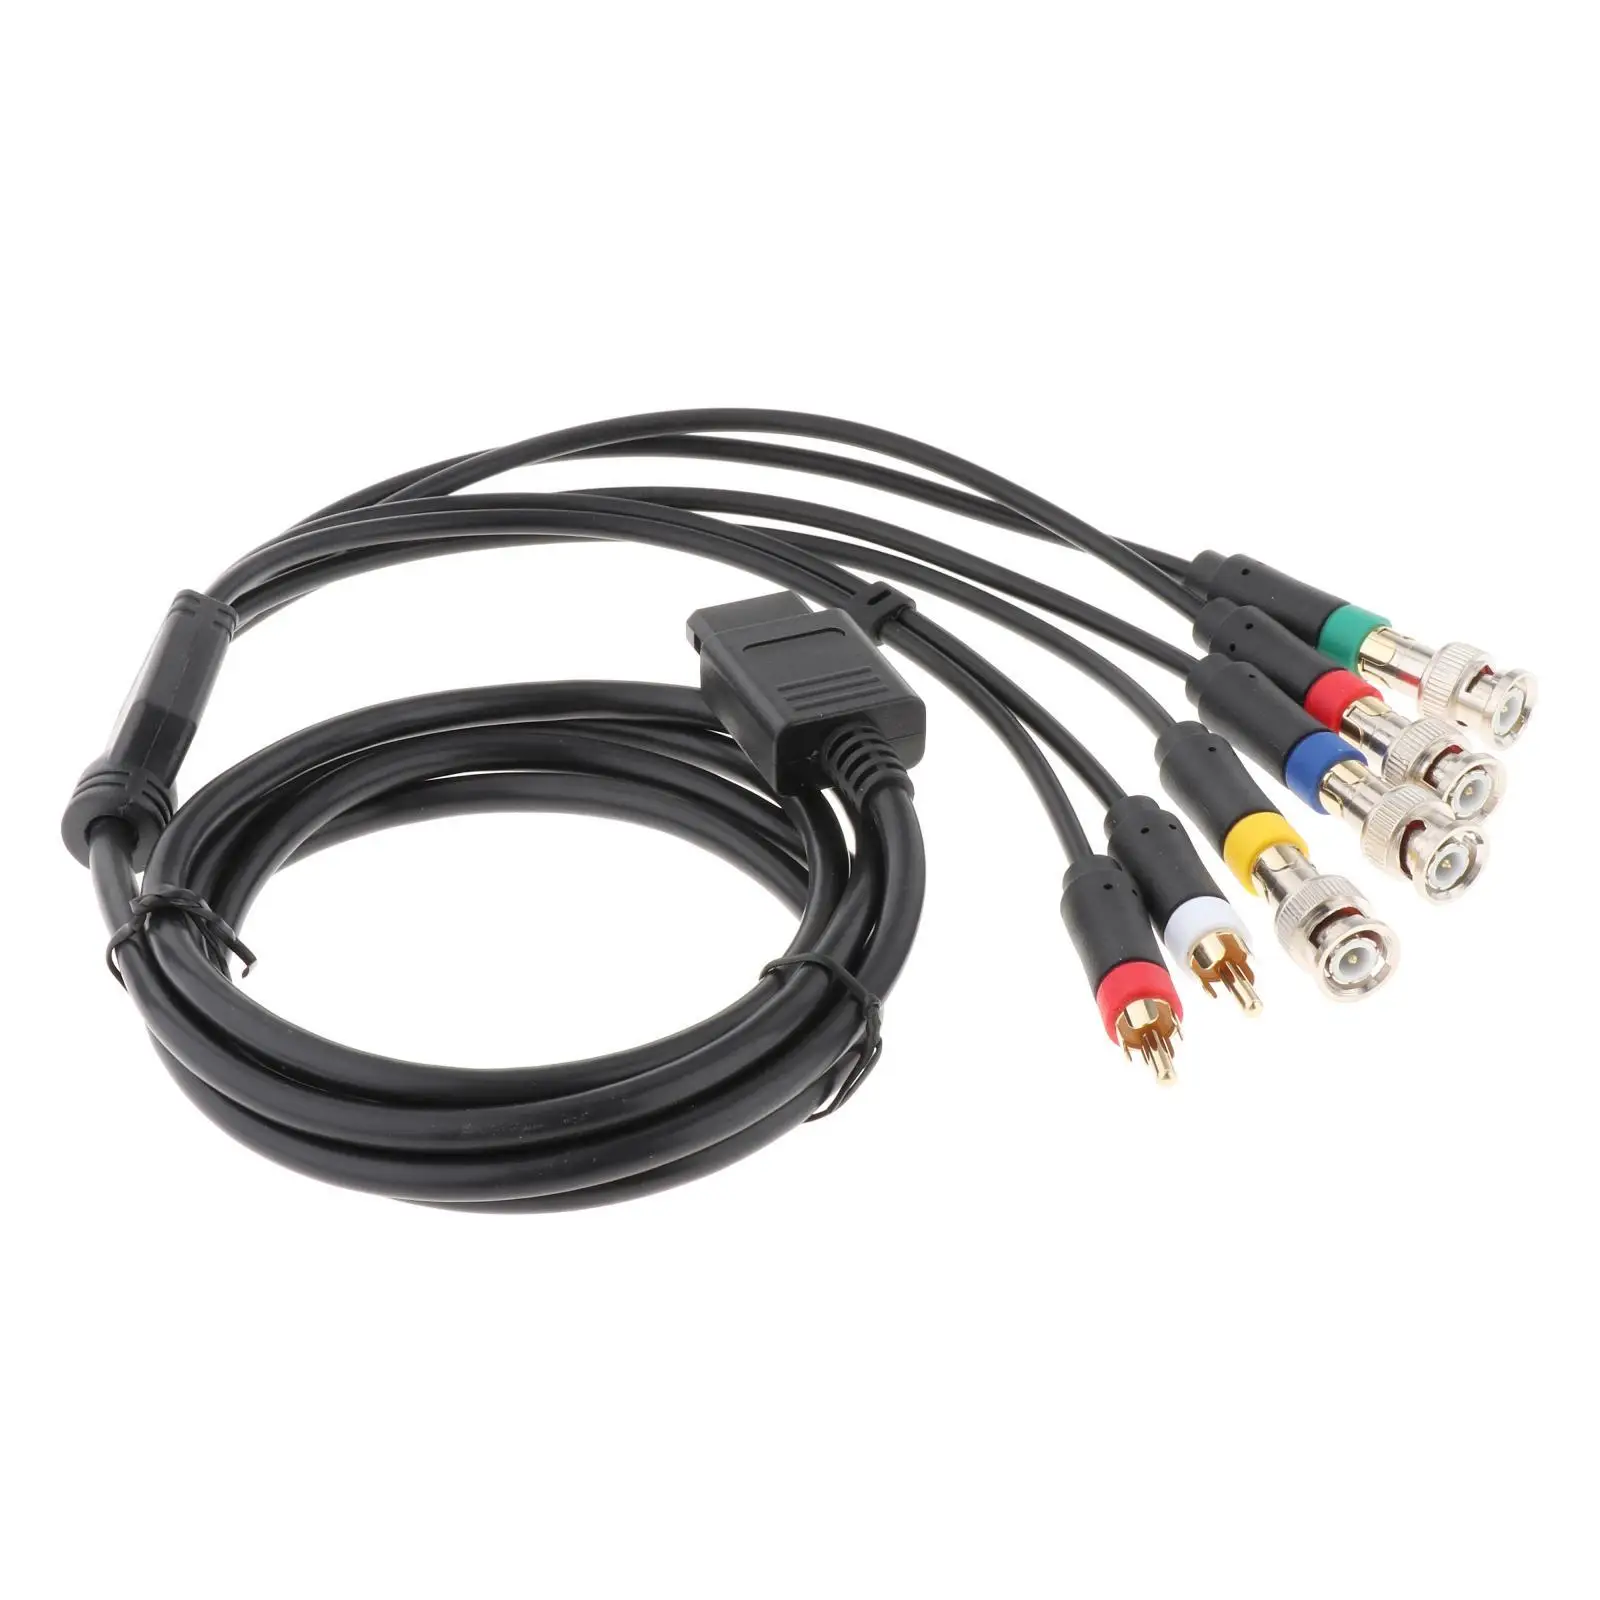 N64 AV Composite Retro Cable Game Video System RCA Adapter Cable Audio TV S-Video Cord for Nintendo 64 HDTV Sfc TV Games Console